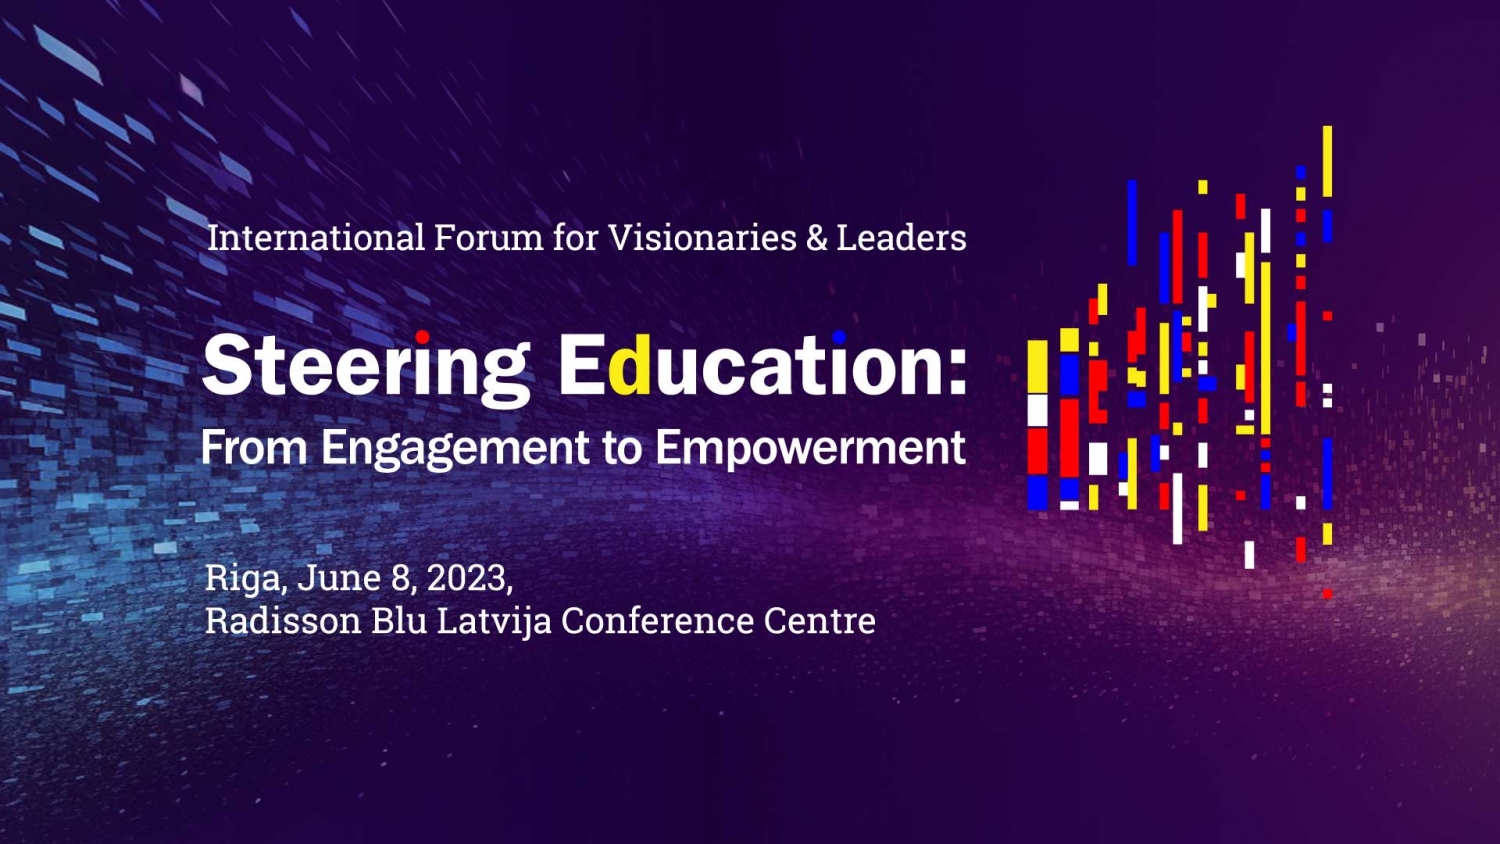 Forum Steering Education: From Engagement to Empowerment